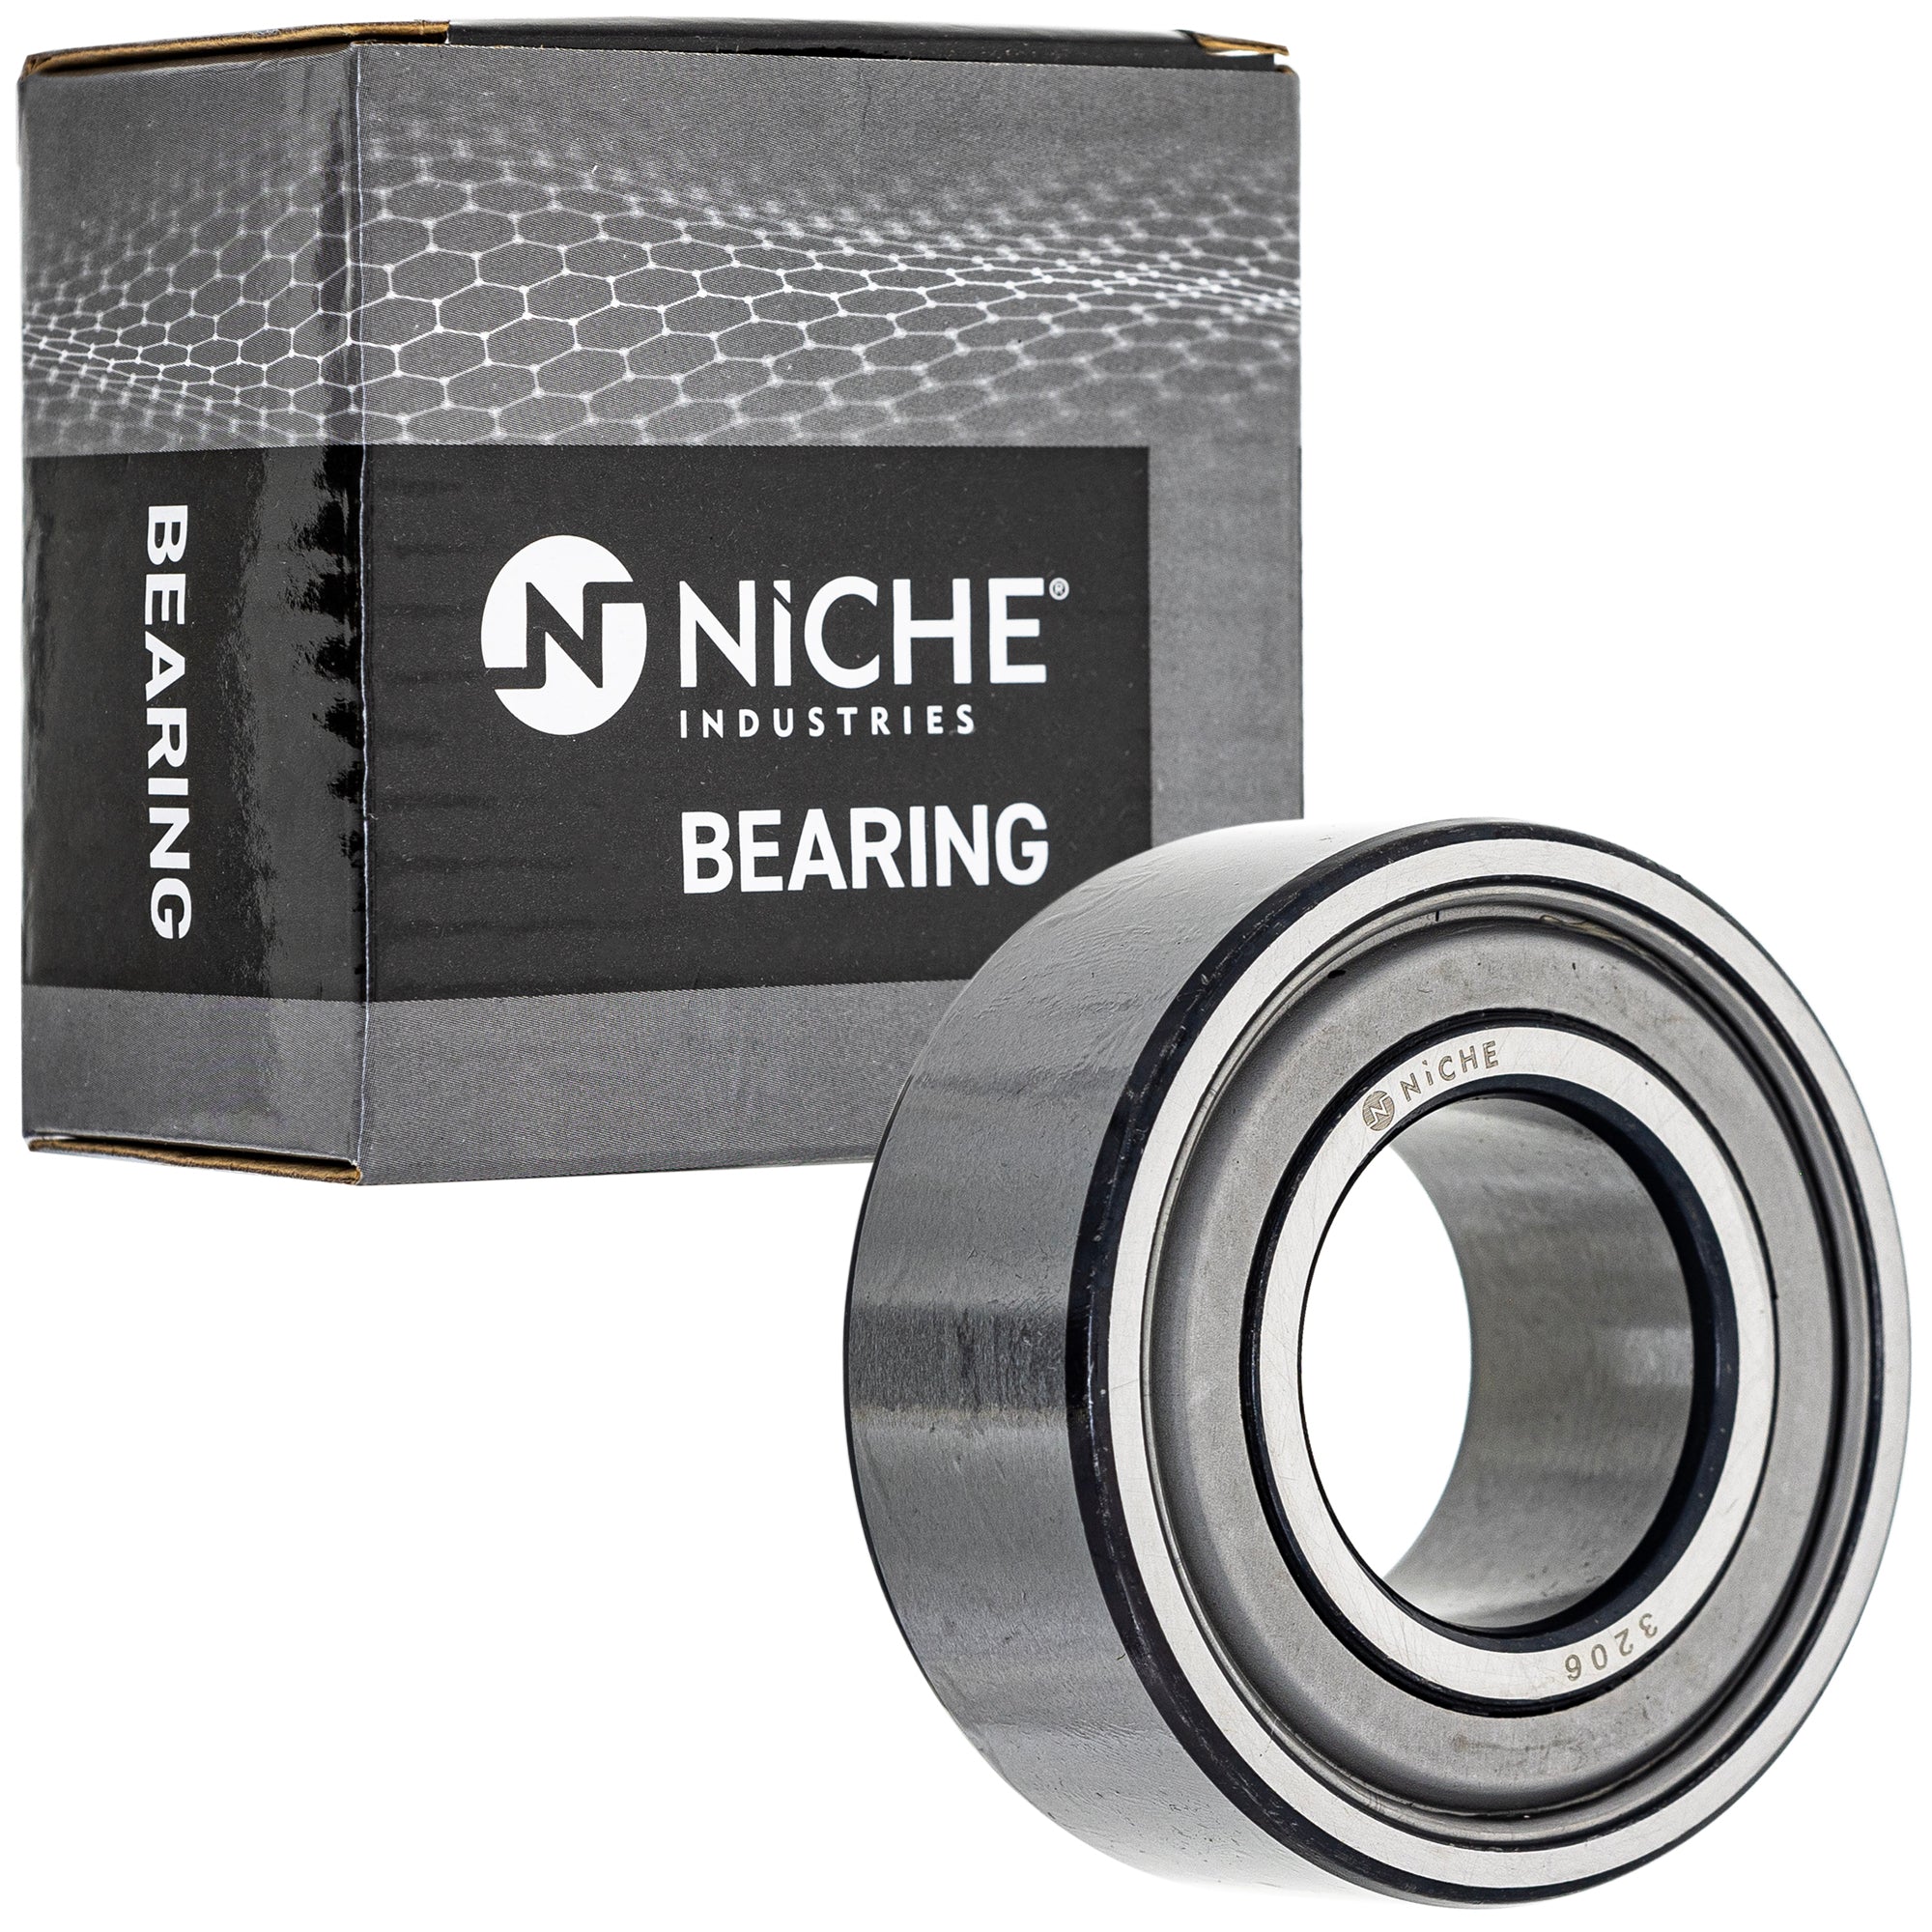 NICHE 519-CBB2297R Bearing 10-Pack for zOTHER Teryx4